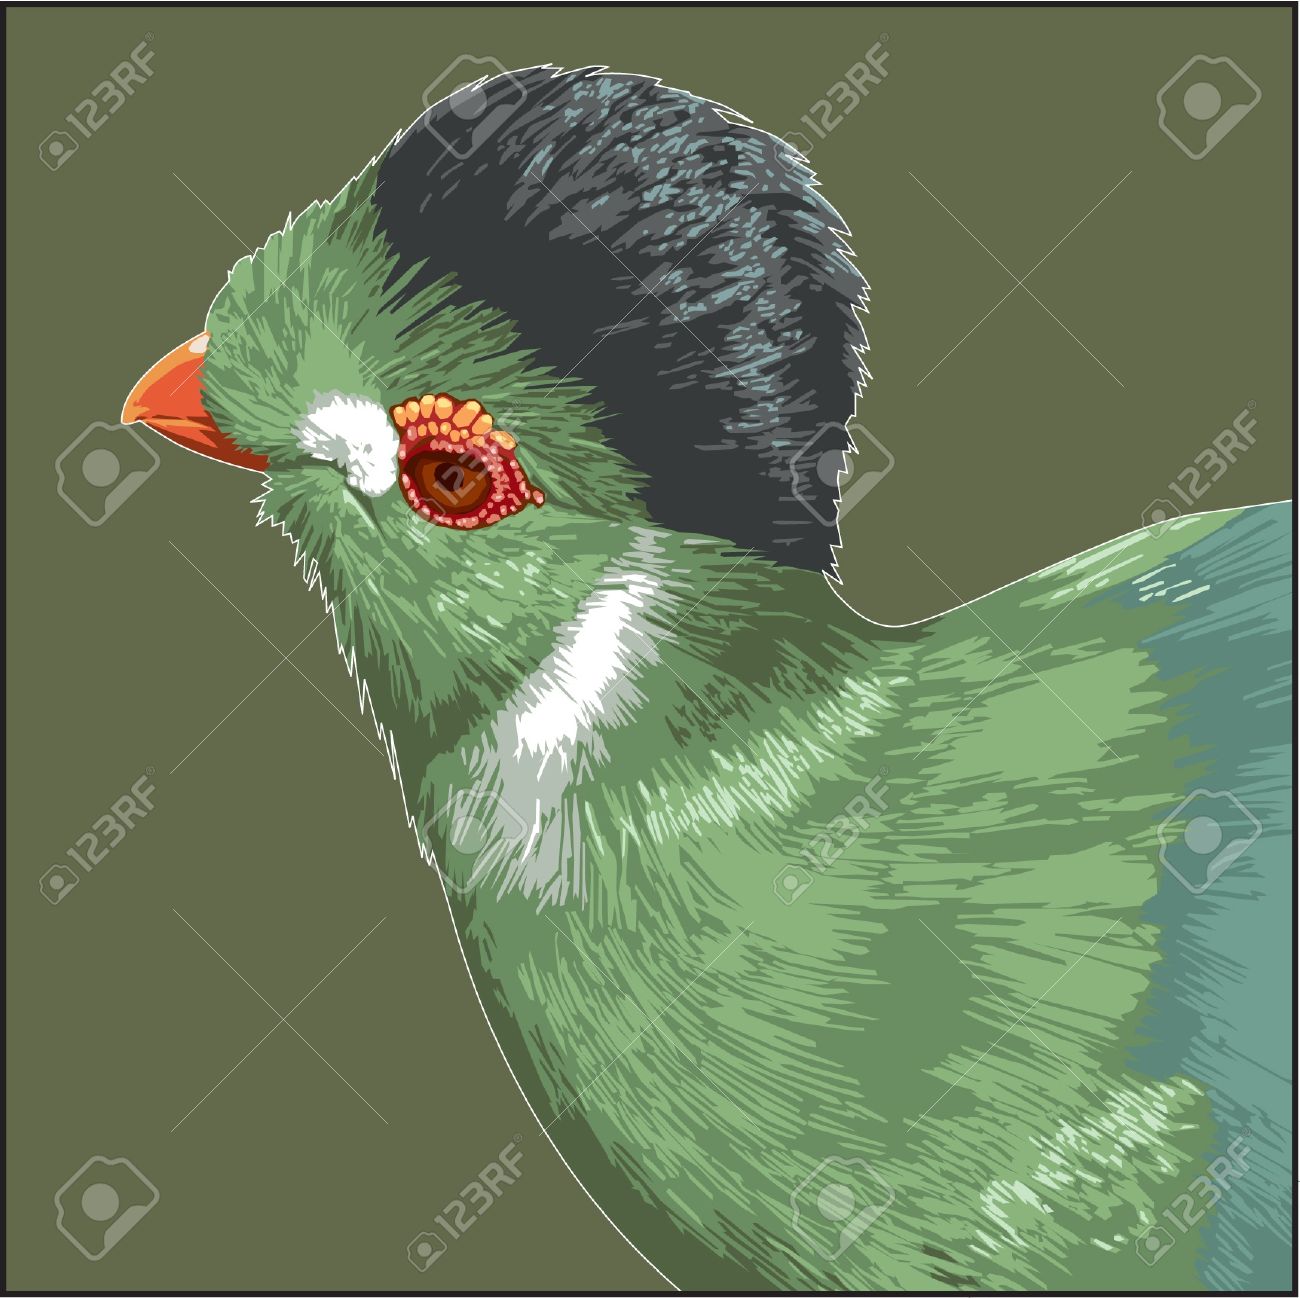 White Cheeked Turacko clipart #7, Download drawings